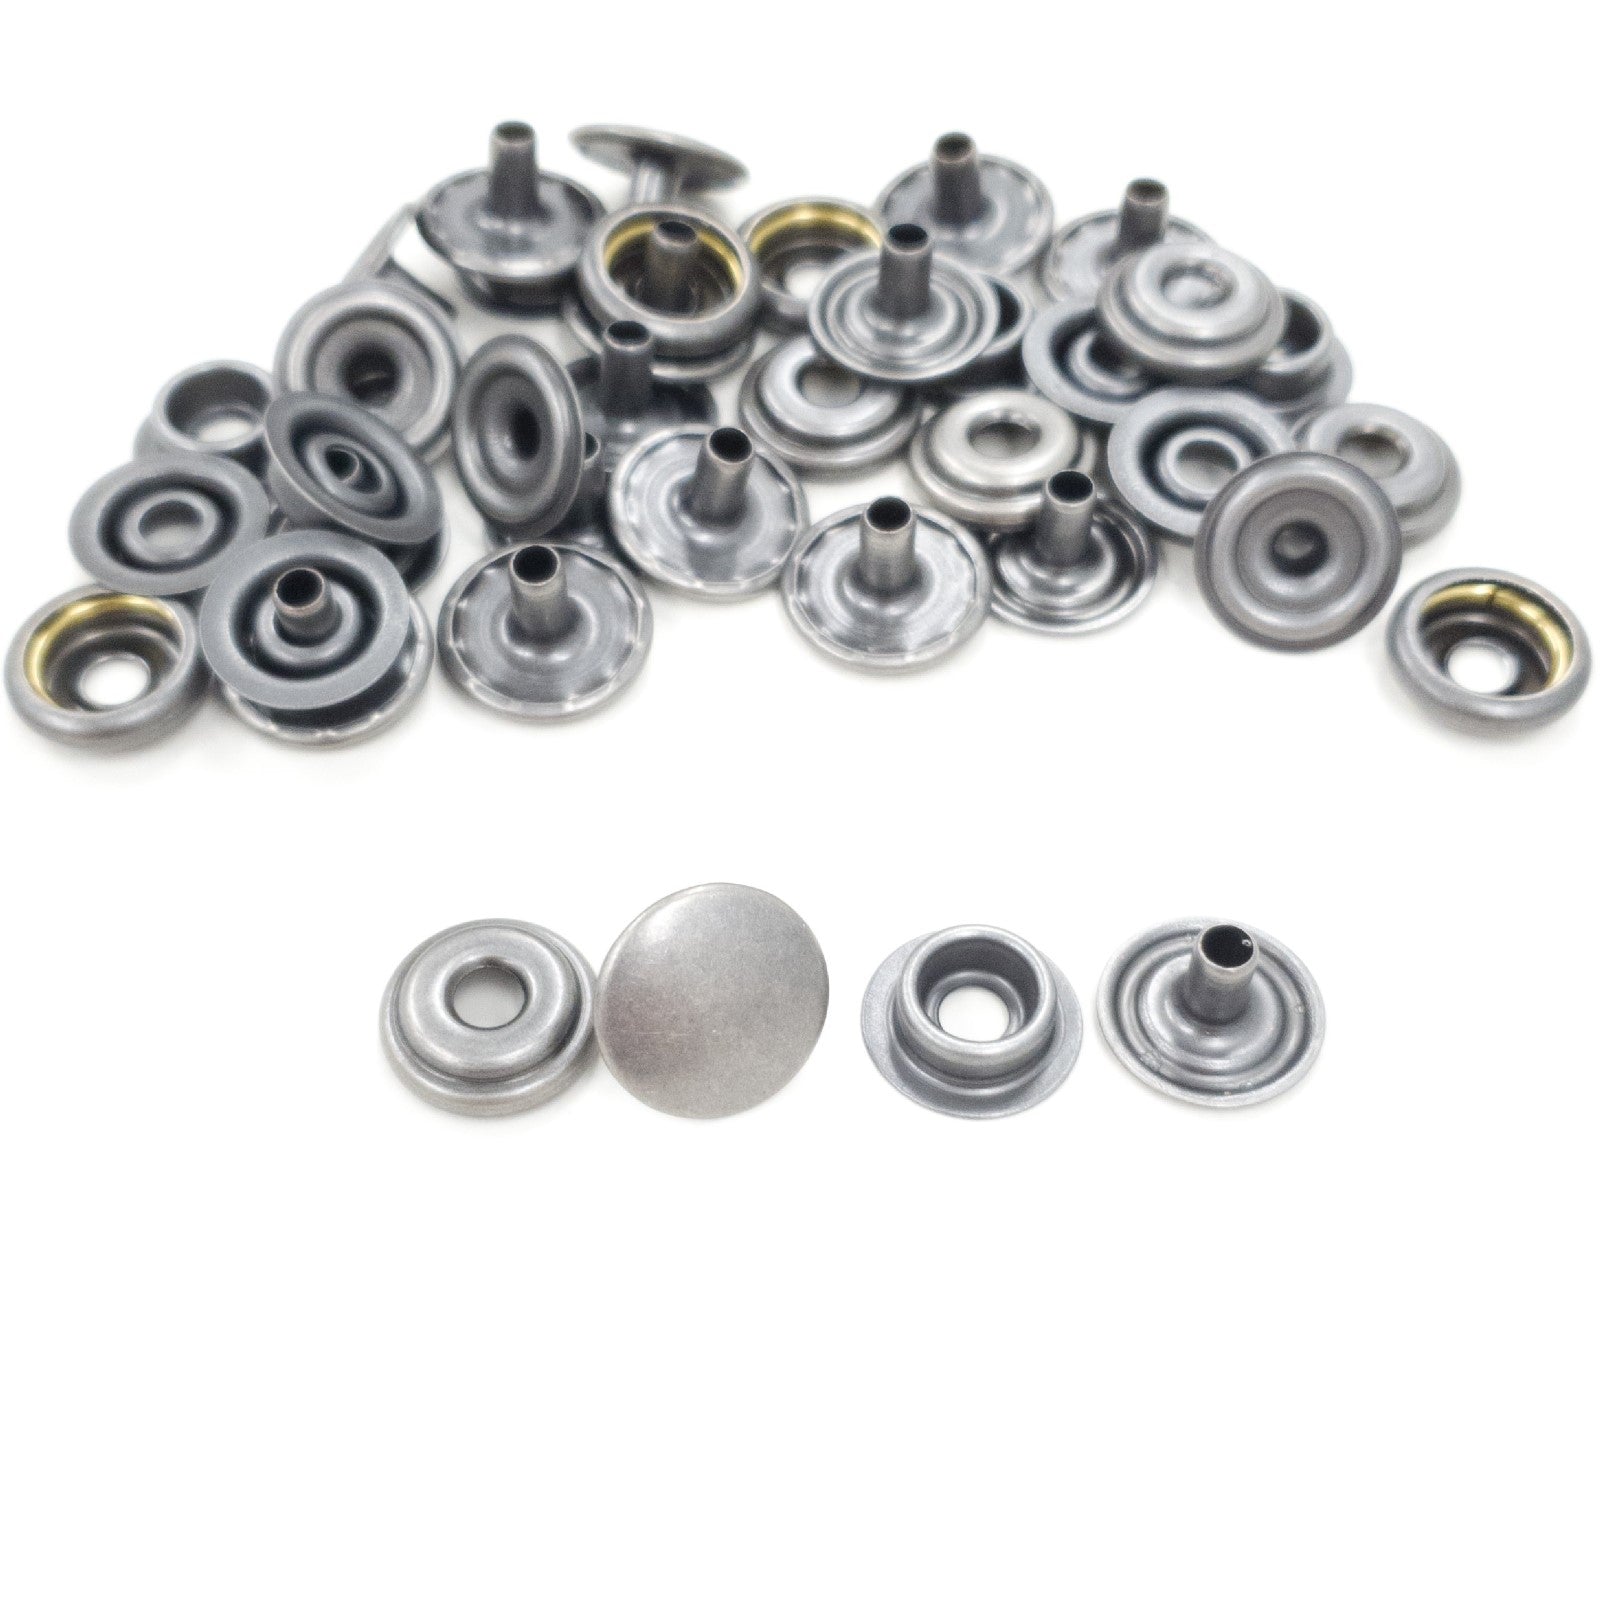 Line 20 & 24 Snap Steel Fasteners, 3/16" & 5/16" post, Line 20 / 10 pk / Antique Nickel | The Leather Guy